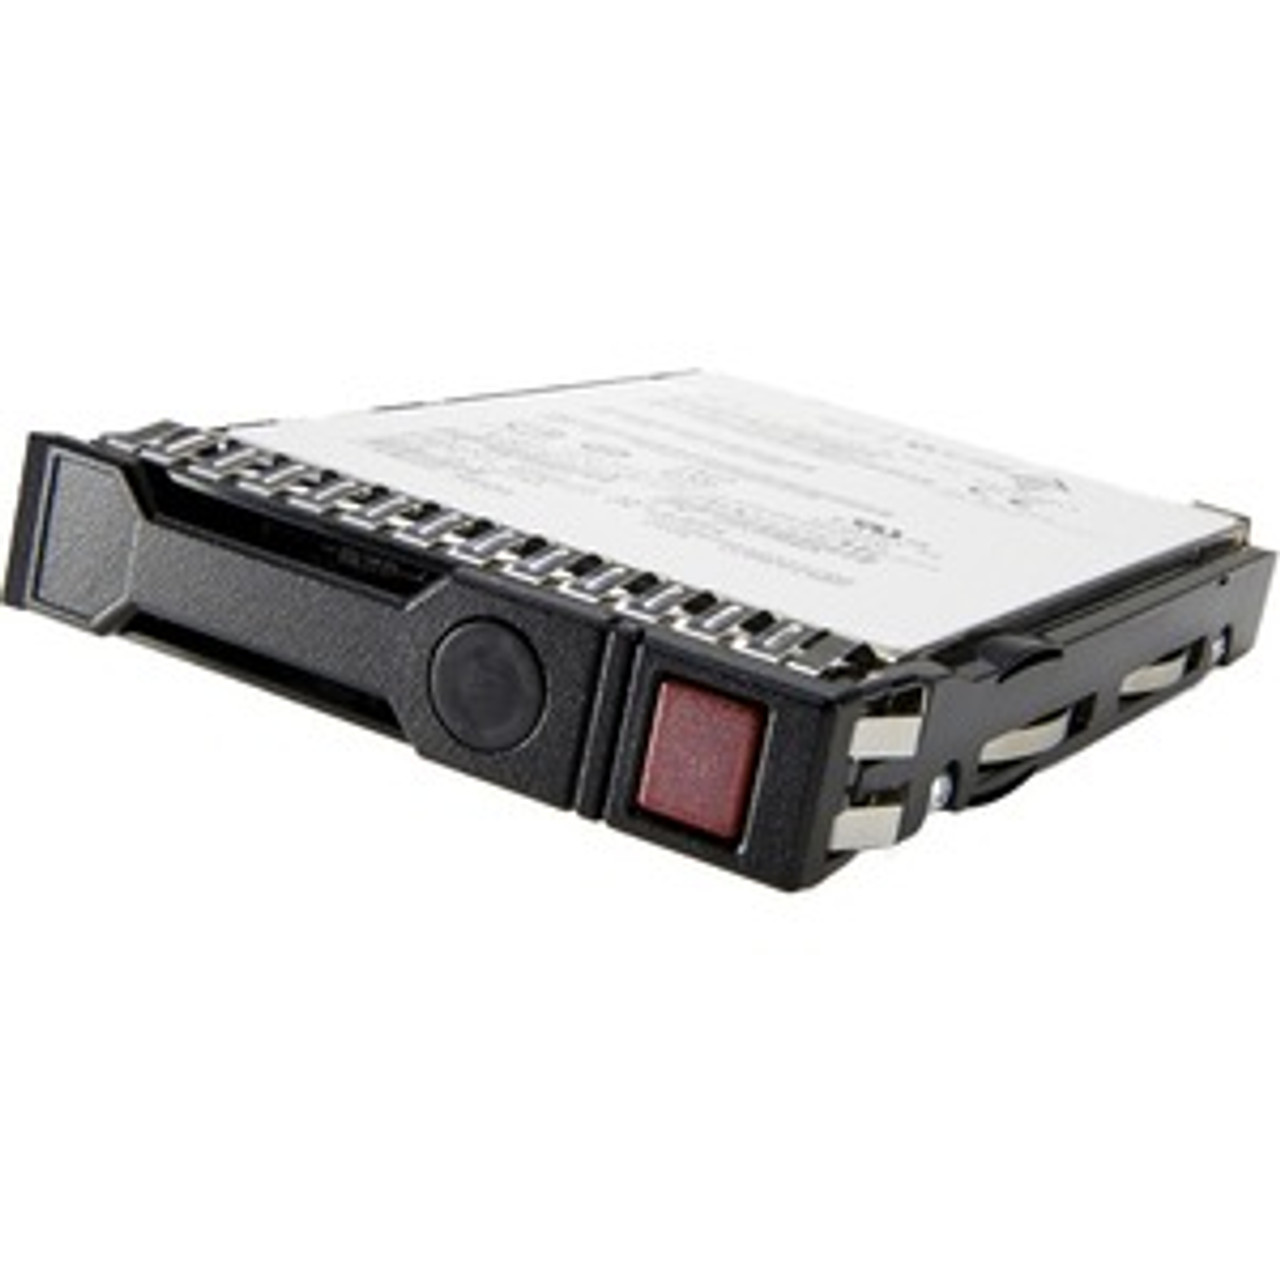 655710-B21-RMK HP 1TB 7200RPM SATA 6Gbps Midline Hot Swap 2.5-inch Internal Hard Drive with Smart Carrier